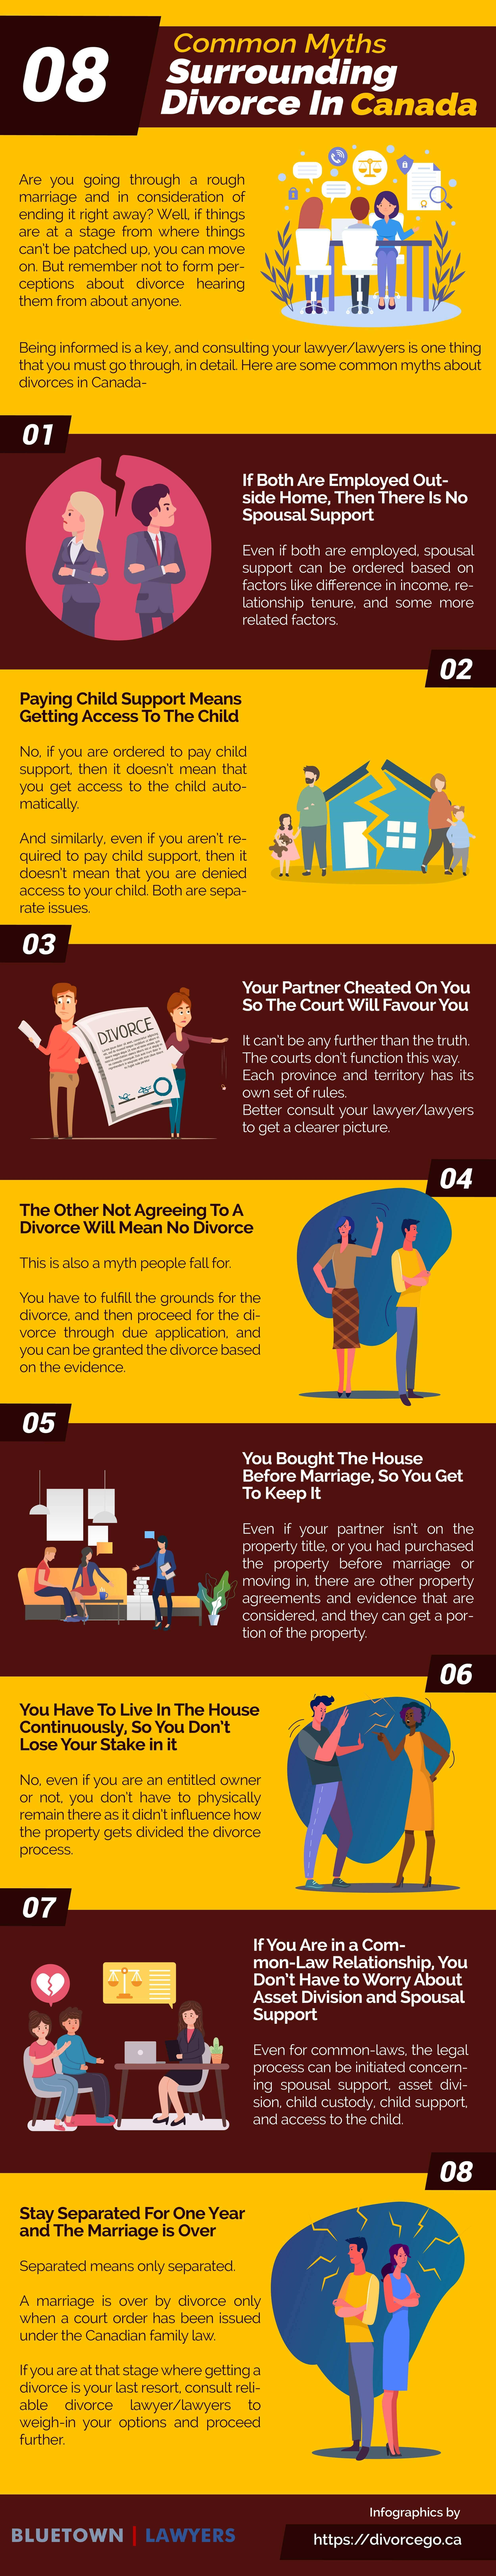 Infographic: 8 Common Myths Surrounding Divorce In Canada